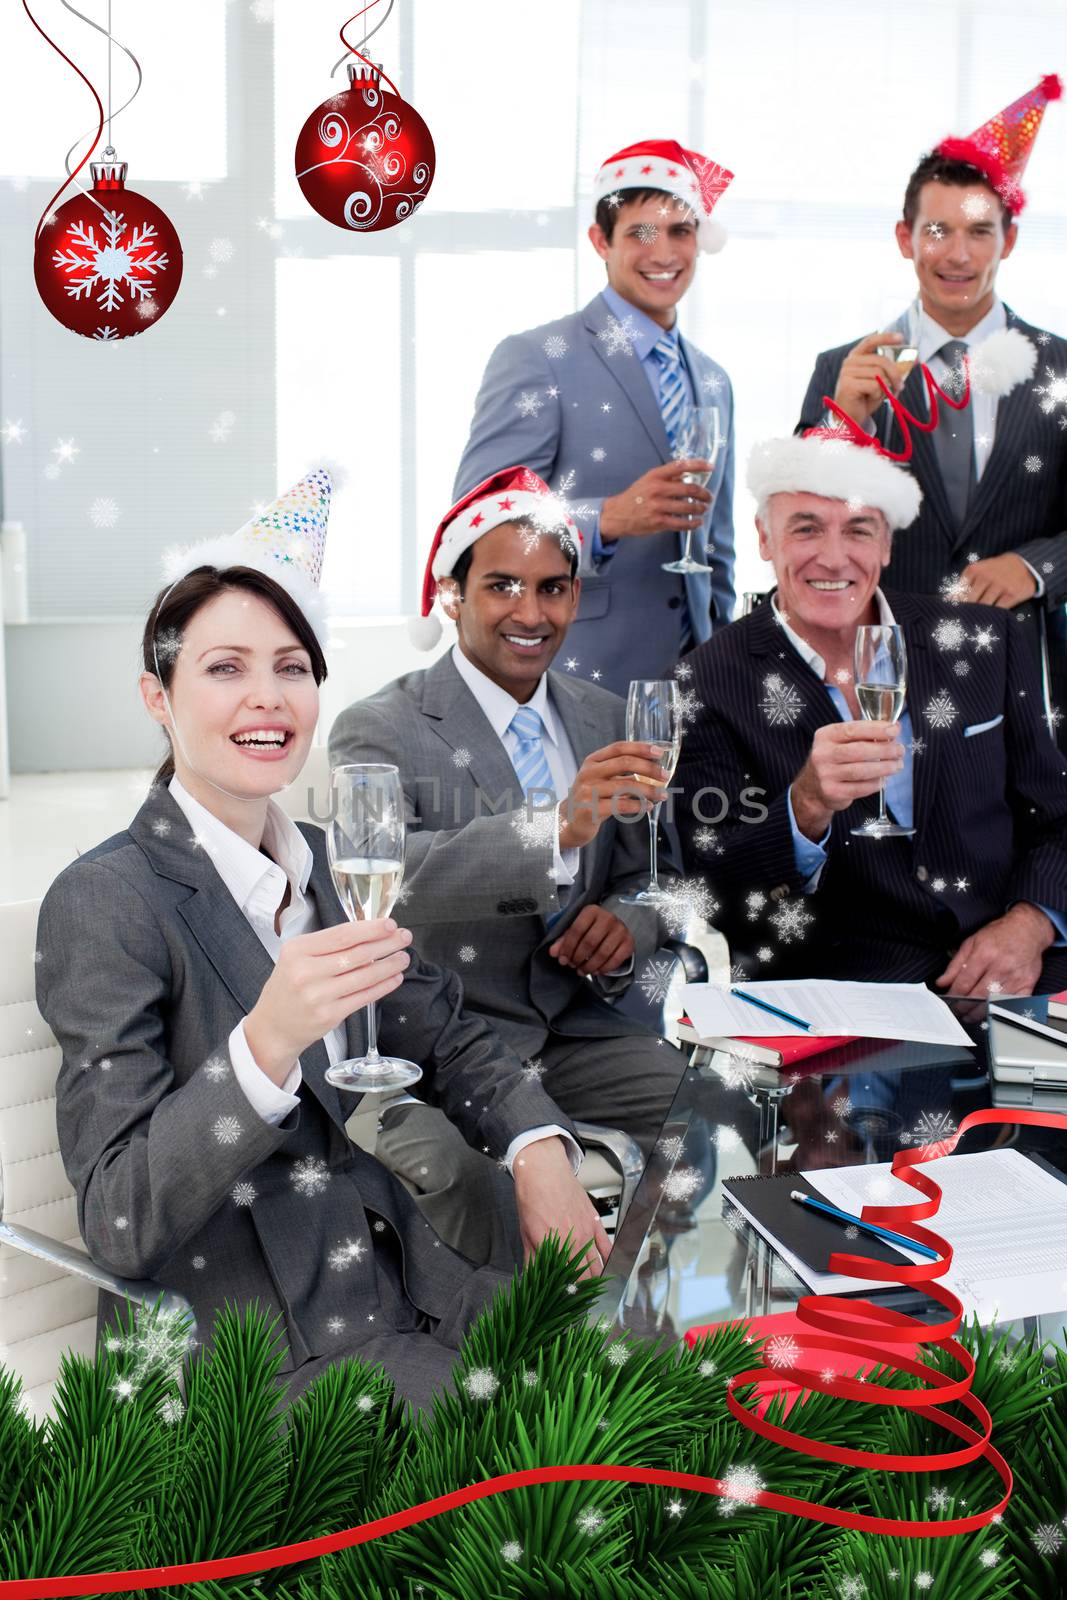 Manager and his team with novelty Christmas hat toasting at a party against snow falling